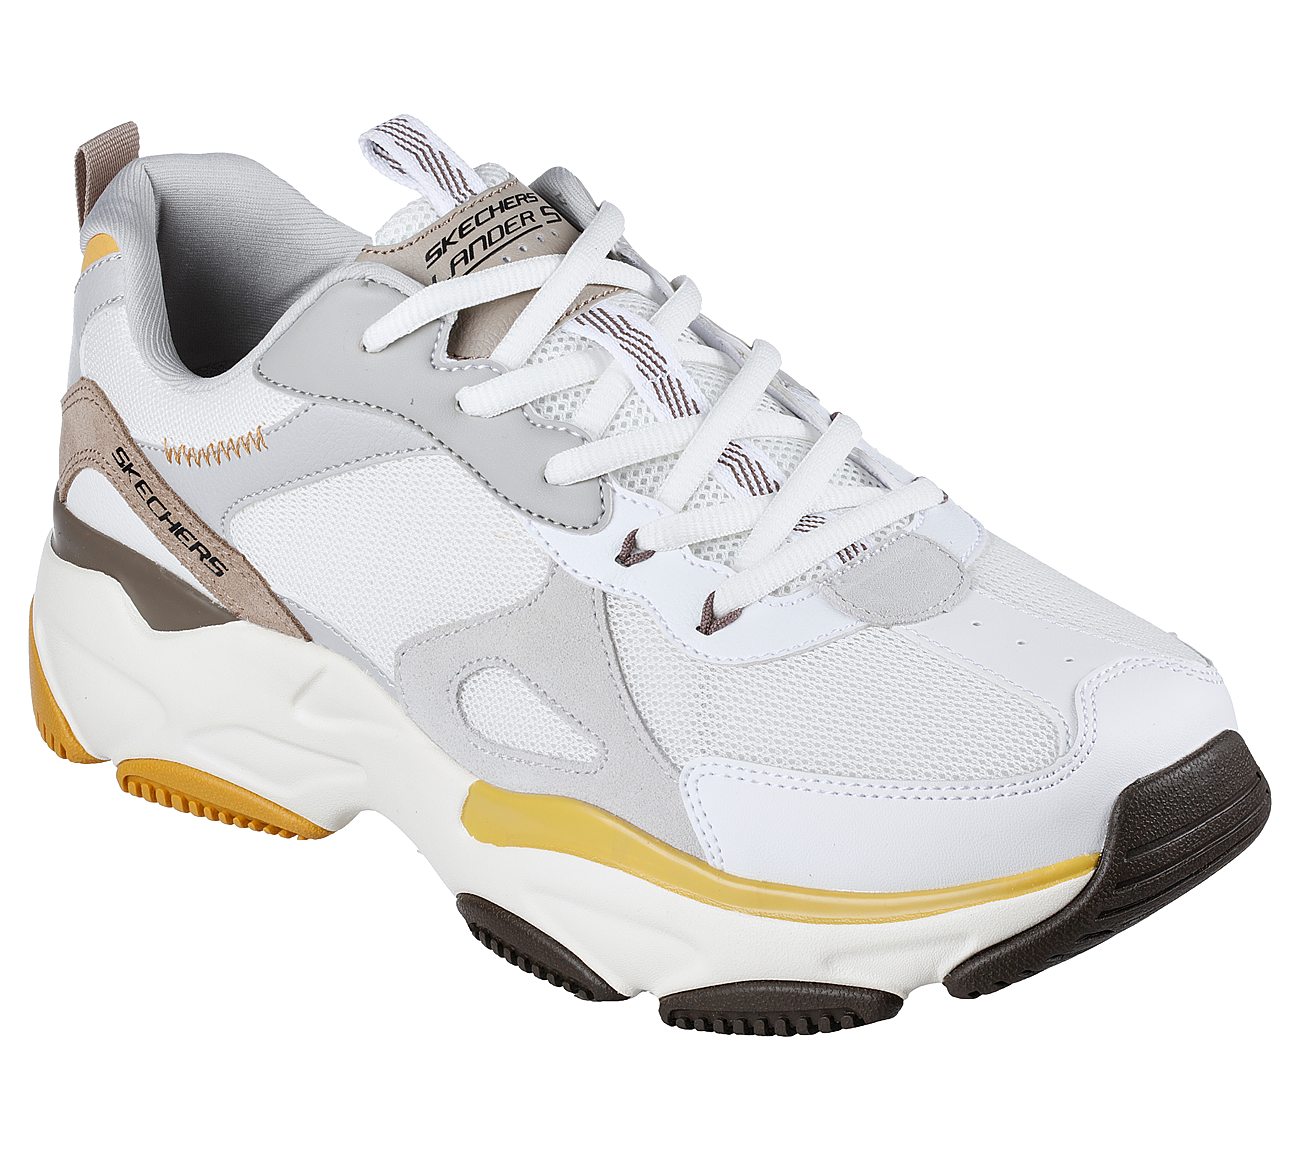 LANDER S-REMIX, WHITE YELLOW Footwear Lateral View